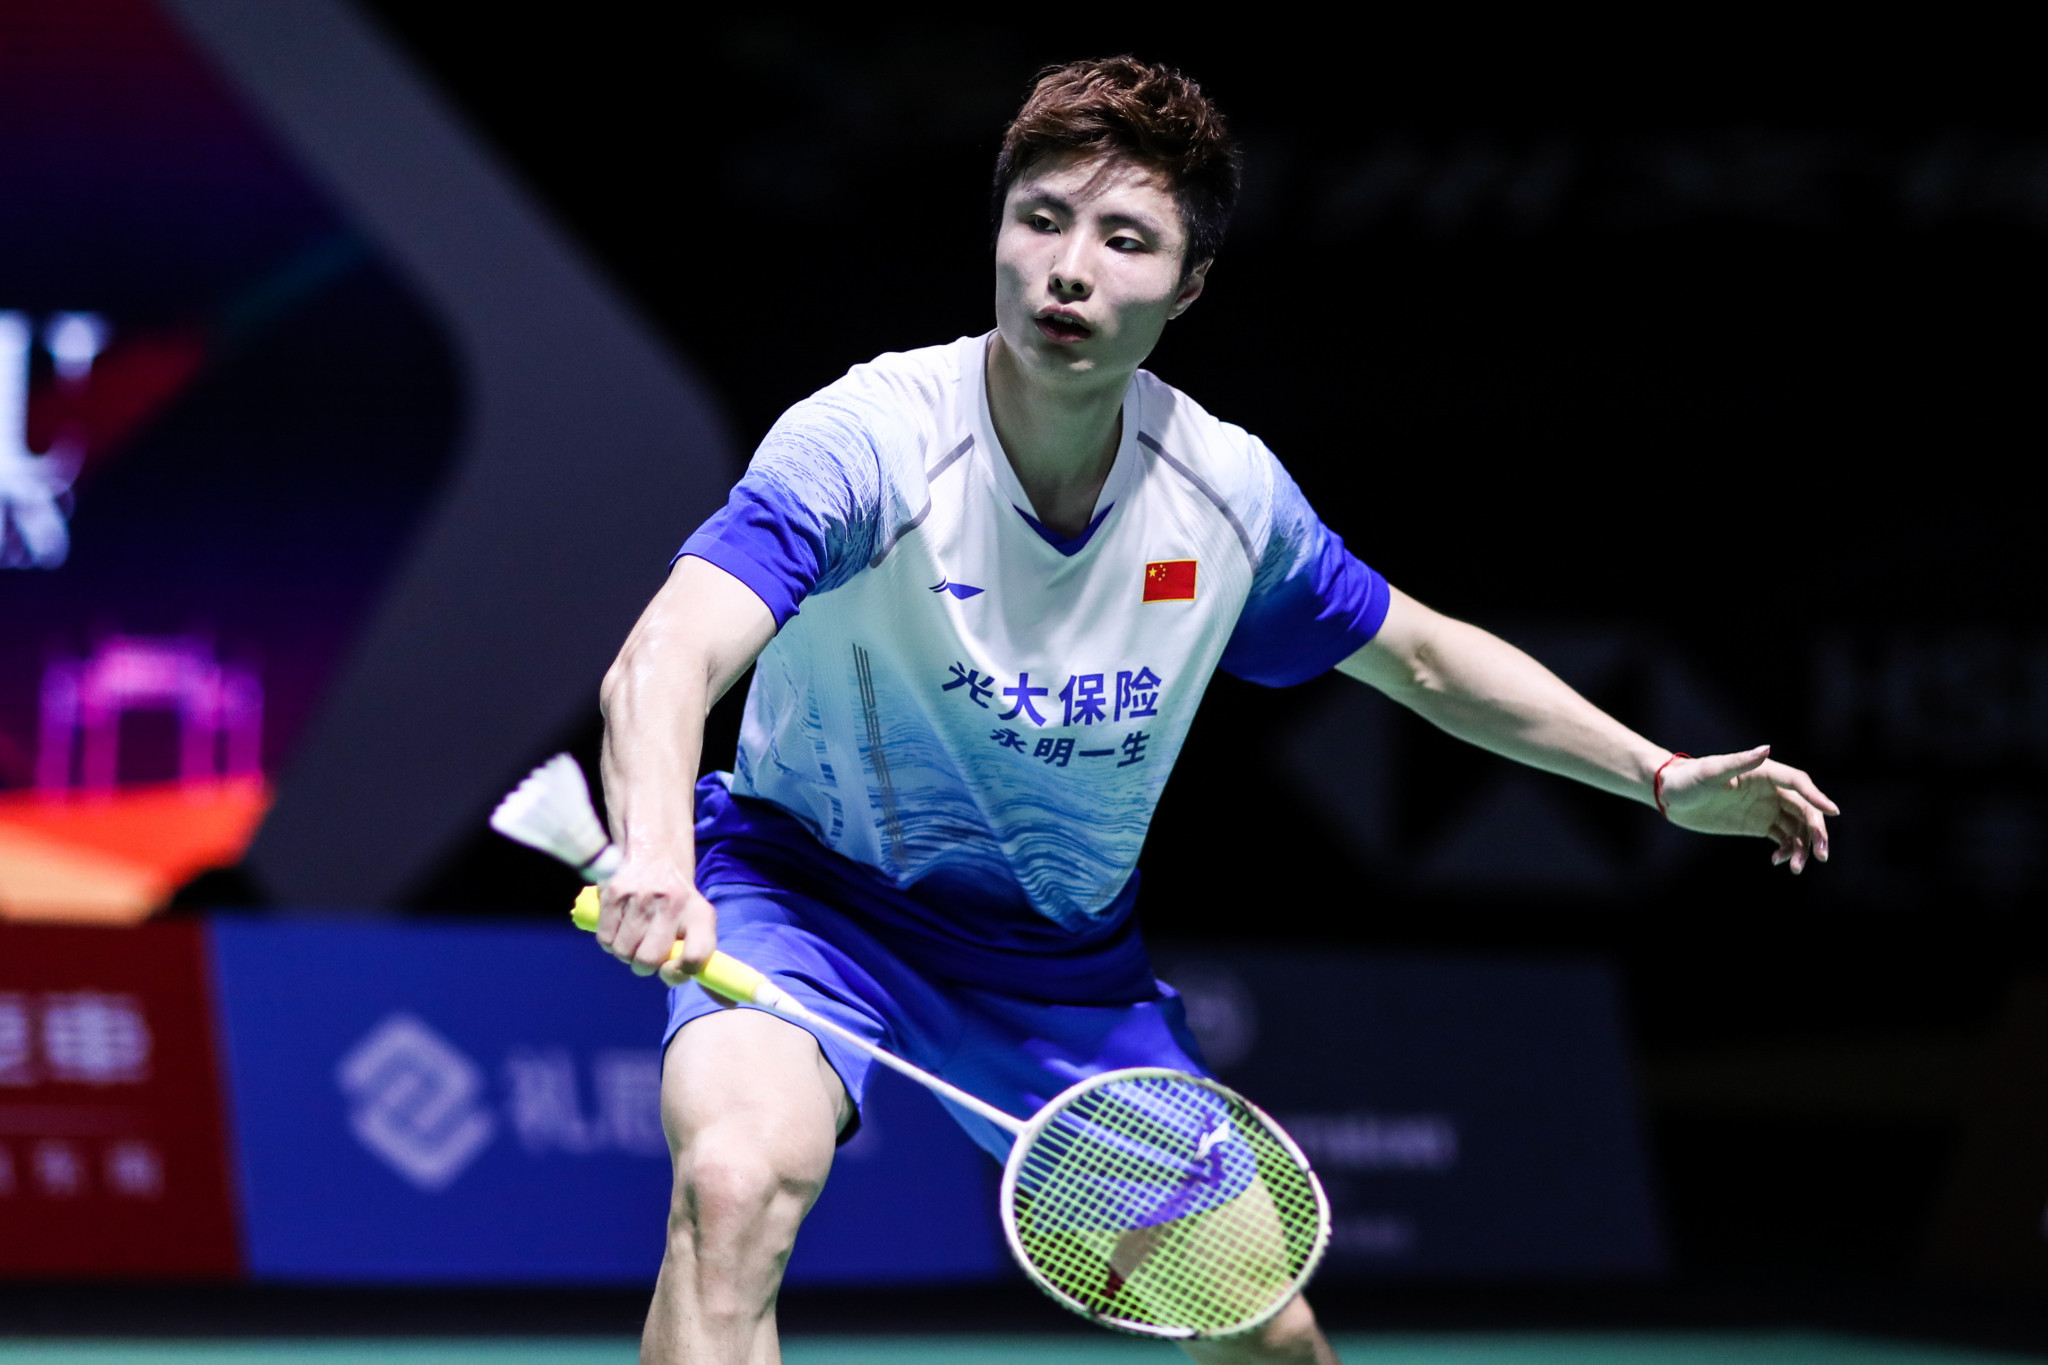 Shi Yuqi won his first round match with a toe blister ©Getty Images